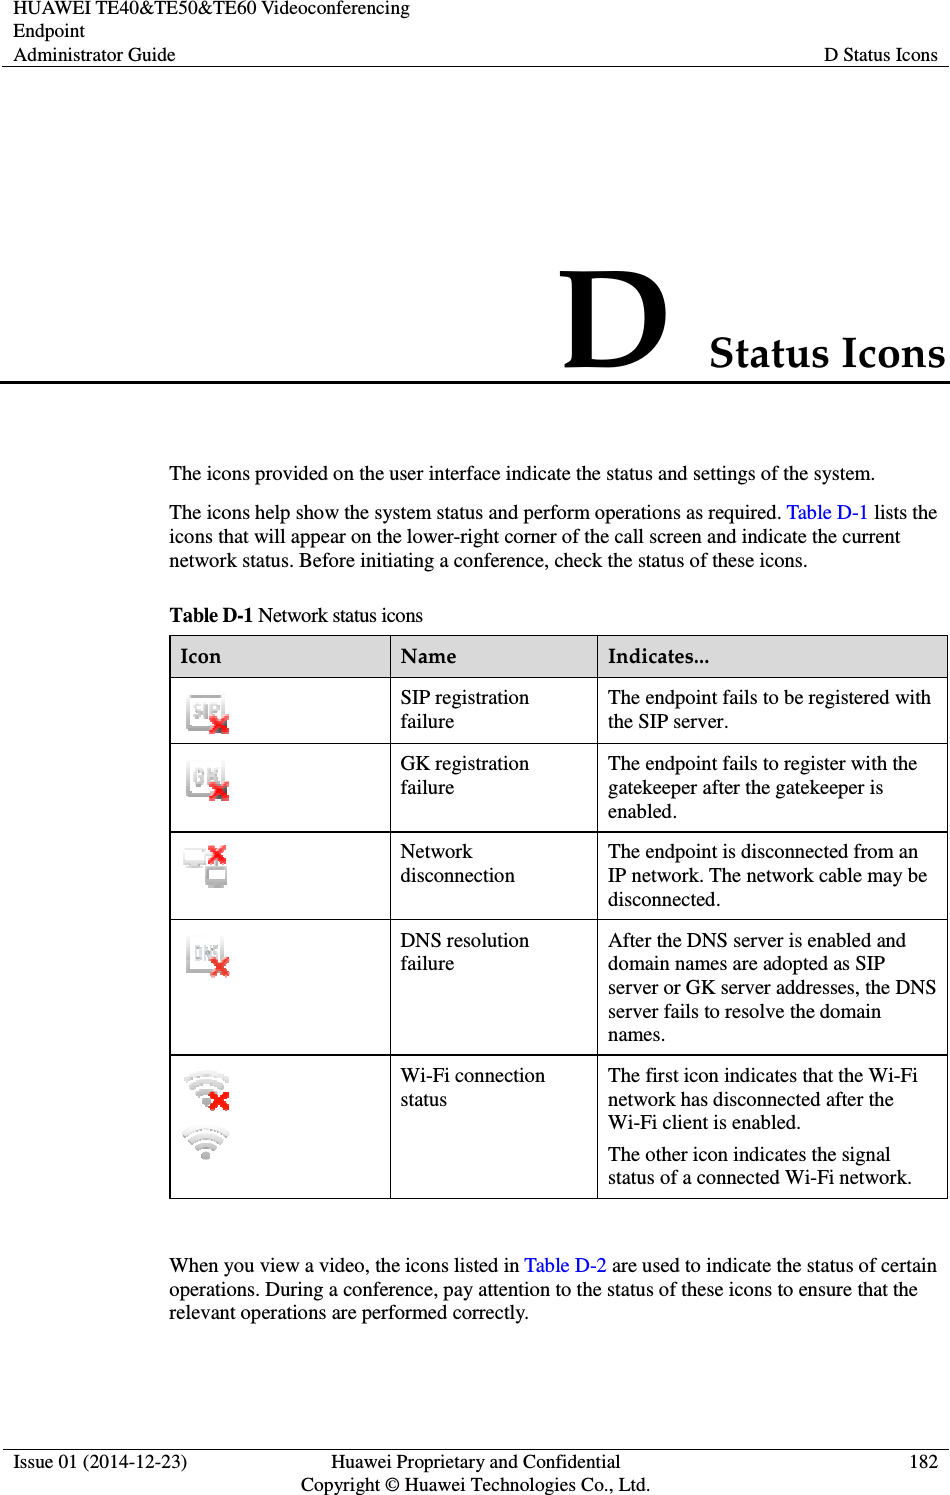 HUAWEI TE40&amp;TE50&amp;TE60 Videoconferencing Endpoint Administrator Guide  D Status Icons  Issue 01 (2014-12-23)  Huawei Proprietary and Confidential                                     Copyright © Huawei Technologies Co., Ltd. 182  D Status Icons The icons provided on the user interface indicate the status and settings of the system. The icons help show the system status and perform operations as required. Table D-1 lists the icons that will appear on the lower-right corner of the call screen and indicate the current network status. Before initiating a conference, check the status of these icons. Table D-1 Network status icons Icon  Name  Indicates...  SIP registration failure The endpoint fails to be registered with the SIP server.  GK registration failure The endpoint fails to register with the gatekeeper after the gatekeeper is enabled.  Network disconnection The endpoint is disconnected from an IP network. The network cable may be disconnected.  DNS resolution failure After the DNS server is enabled and domain names are adopted as SIP server or GK server addresses, the DNS server fails to resolve the domain names.   Wi-Fi connection status The first icon indicates that the Wi-Fi network has disconnected after the Wi-Fi client is enabled. The other icon indicates the signal status of a connected Wi-Fi network.  When you view a video, the icons listed in Table D-2 are used to indicate the status of certain operations. During a conference, pay attention to the status of these icons to ensure that the relevant operations are performed correctly. 